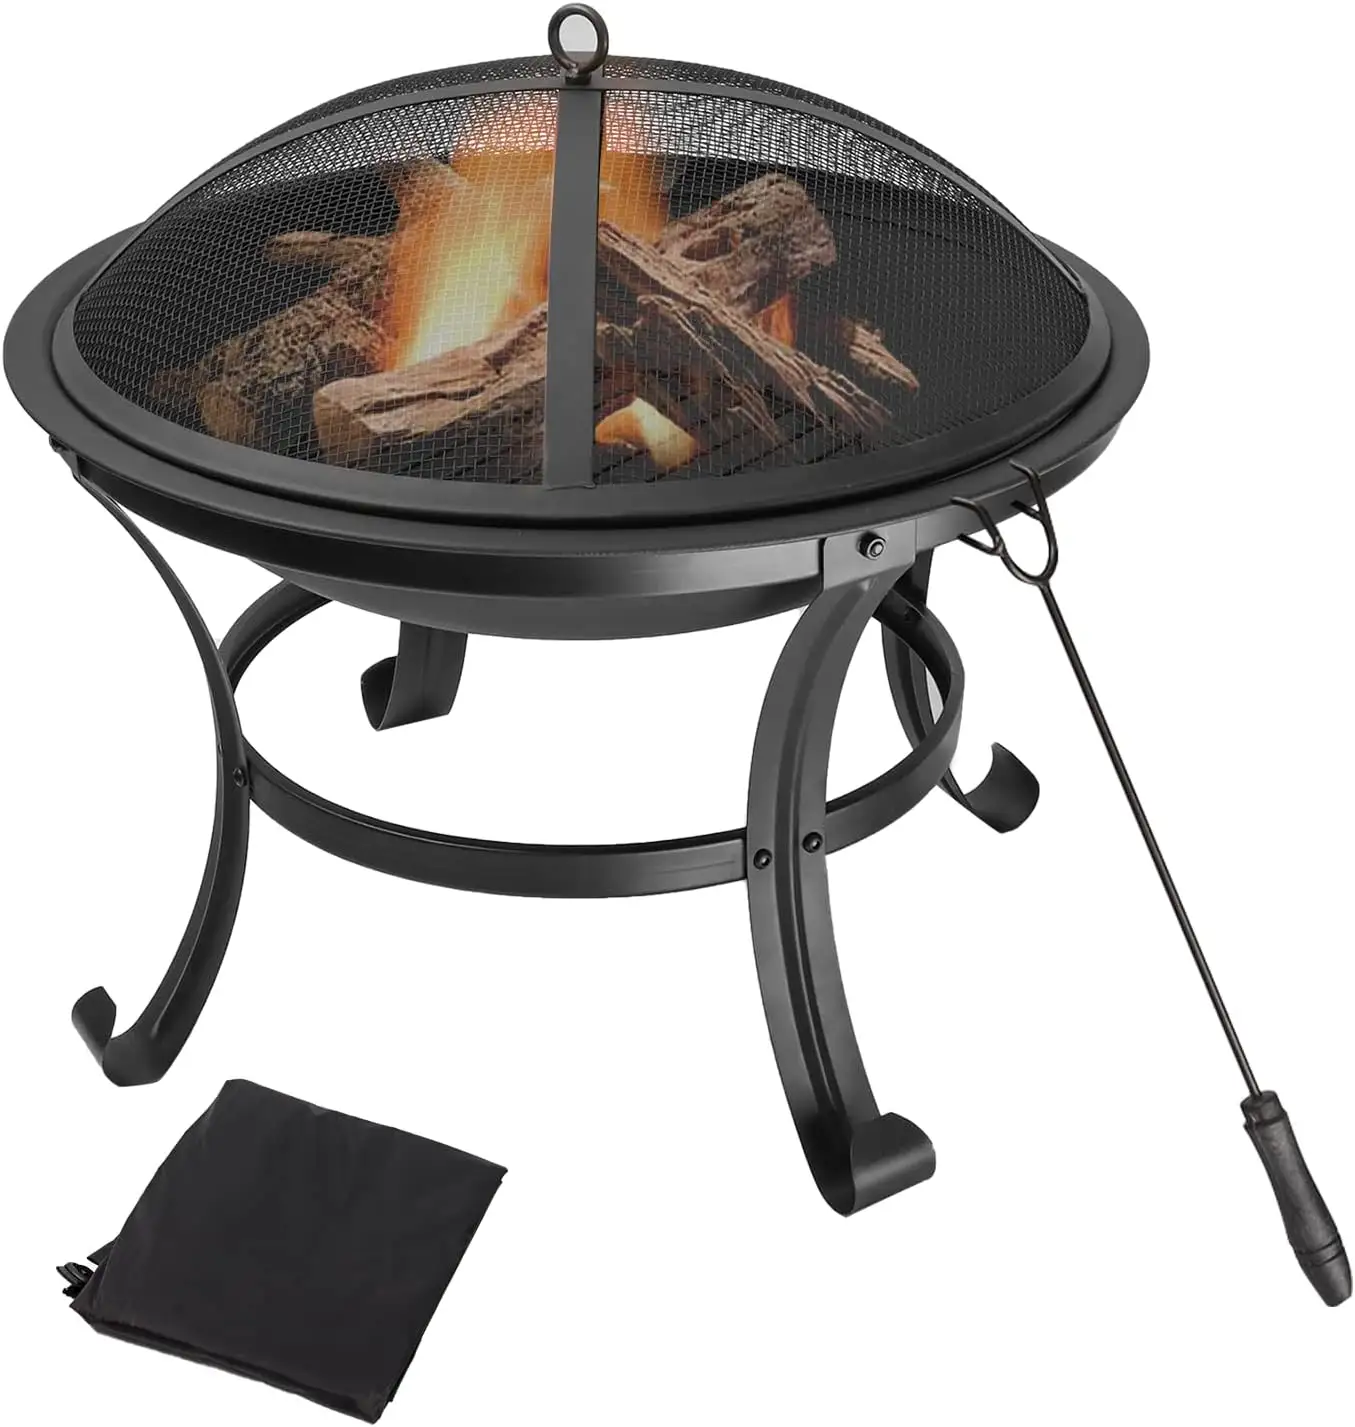 Fire Pit for Wood Burning Portable Fire Pit with Spark Screen Cover Log Grate Fire poker for Backyard Camping Beach